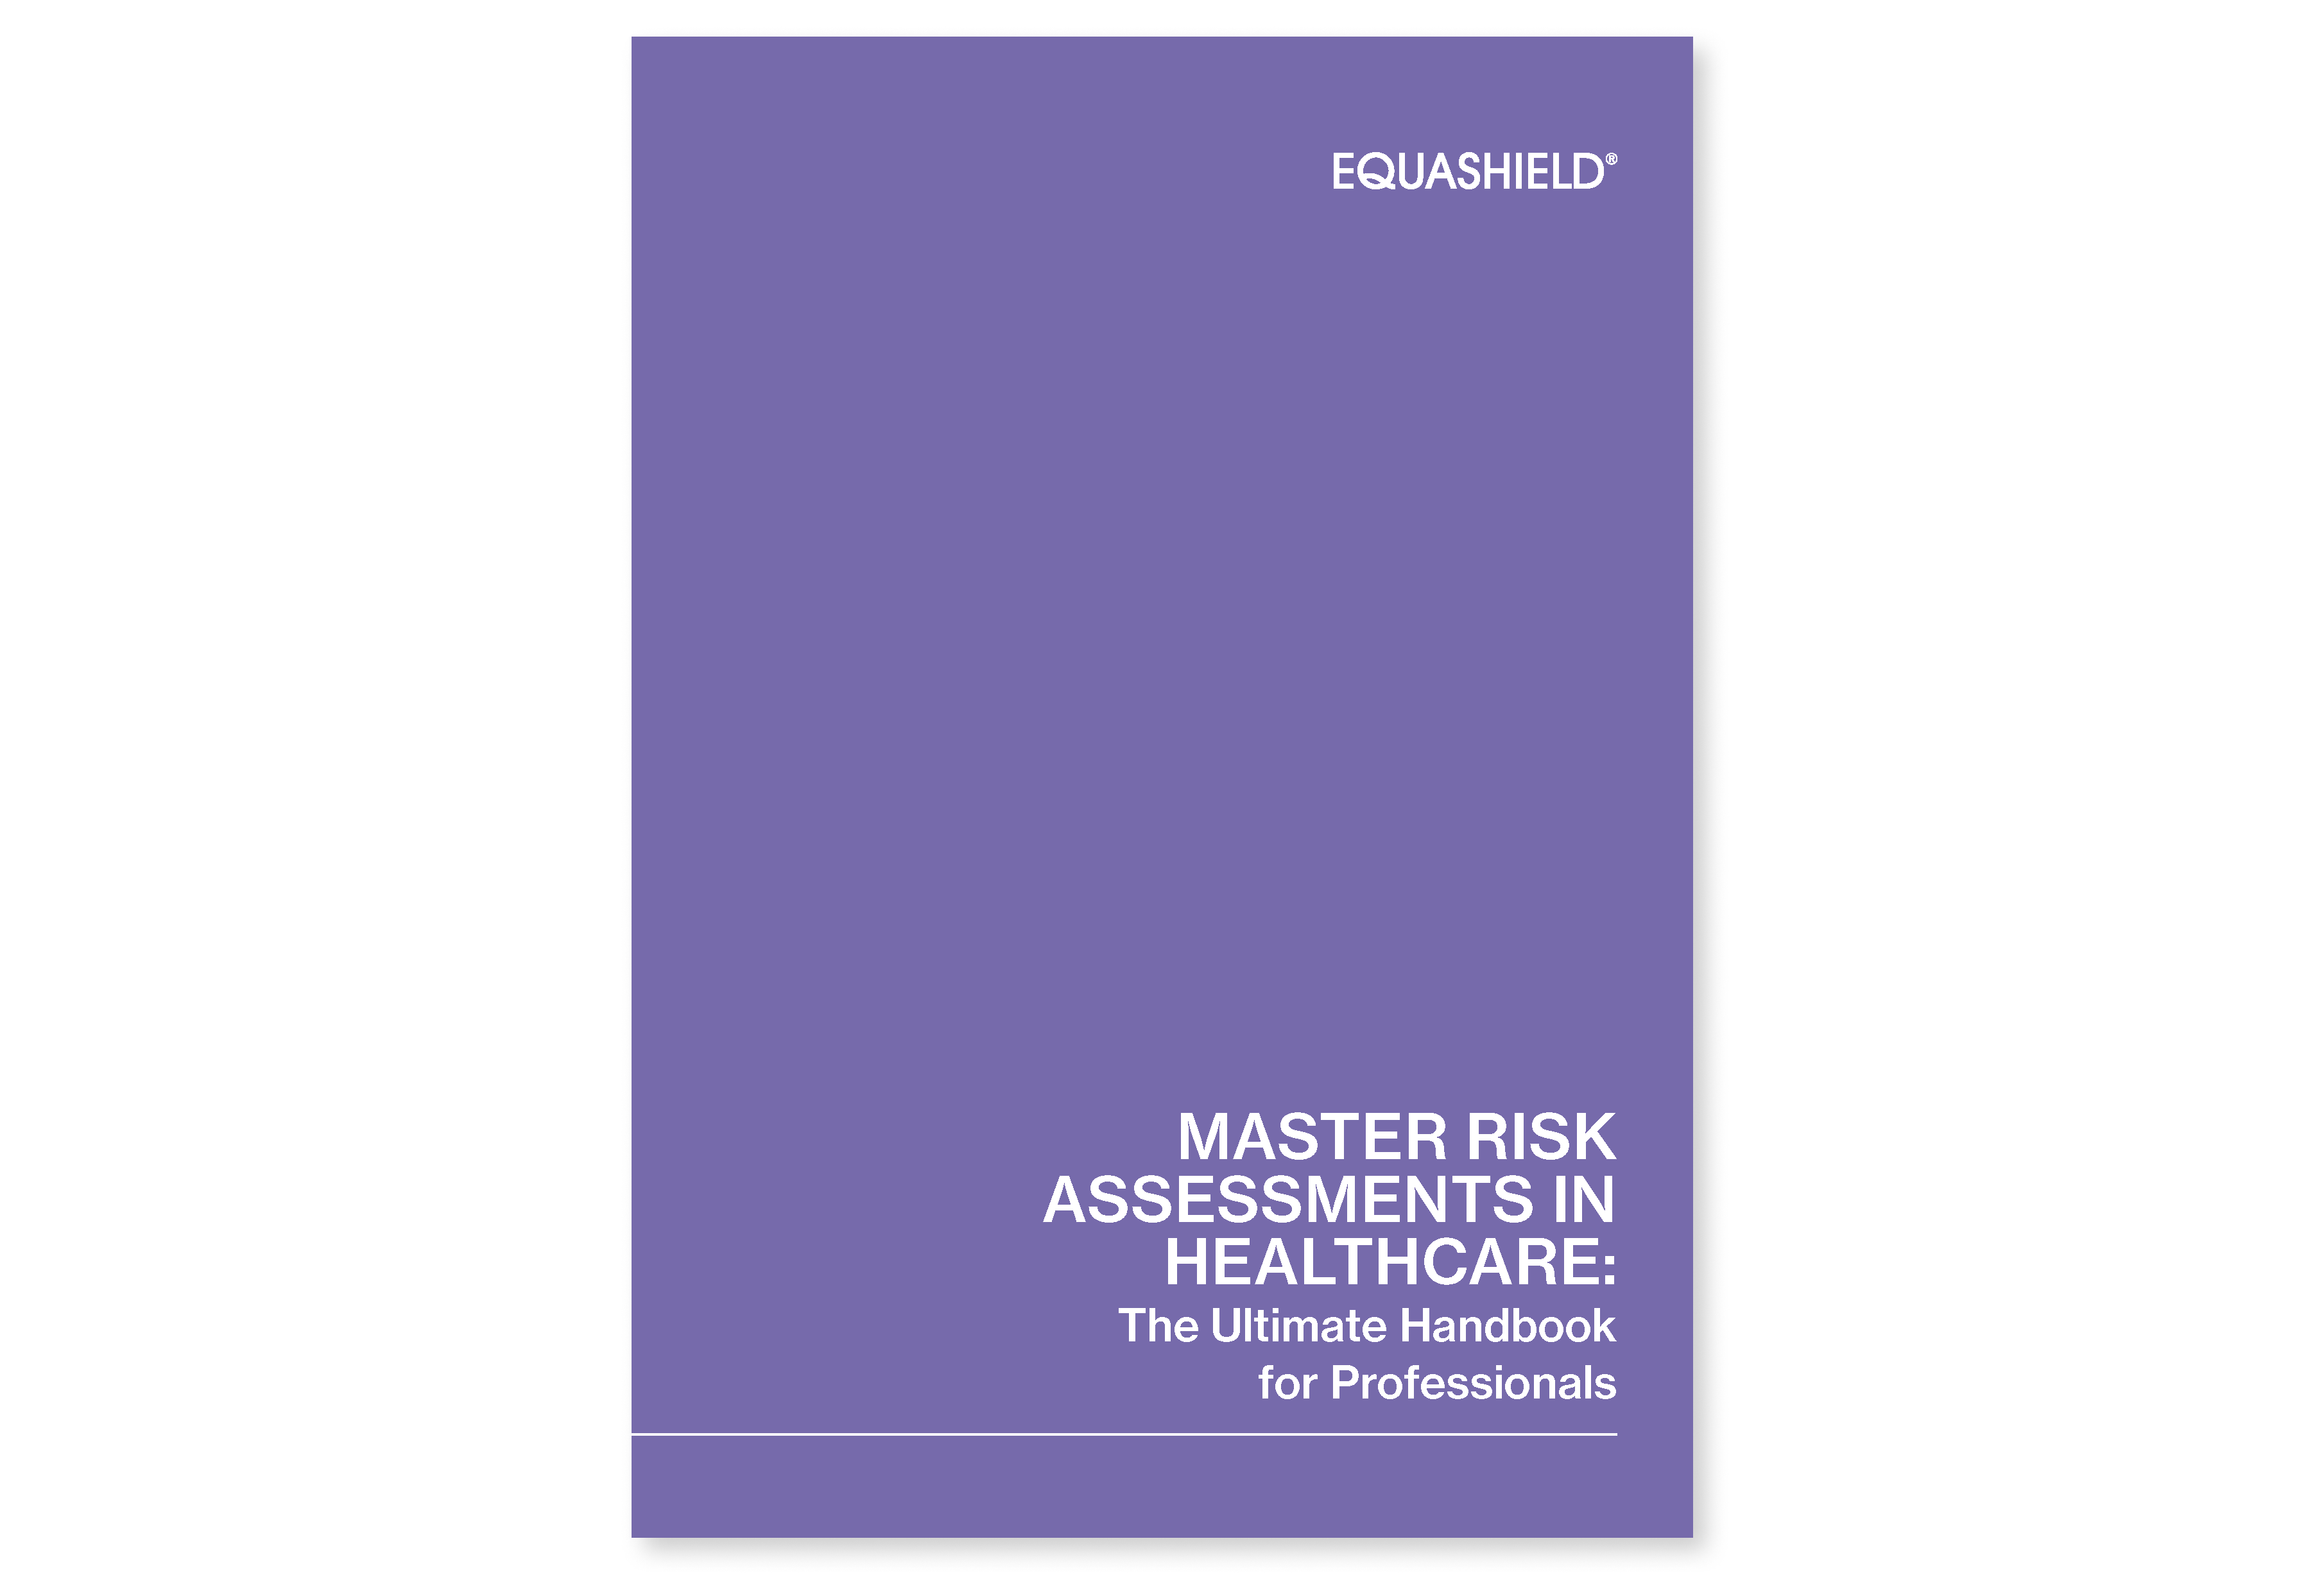 Cover of 'Master Risk Assessments in Healthcare' guide, showcasing safety and compliance strategies